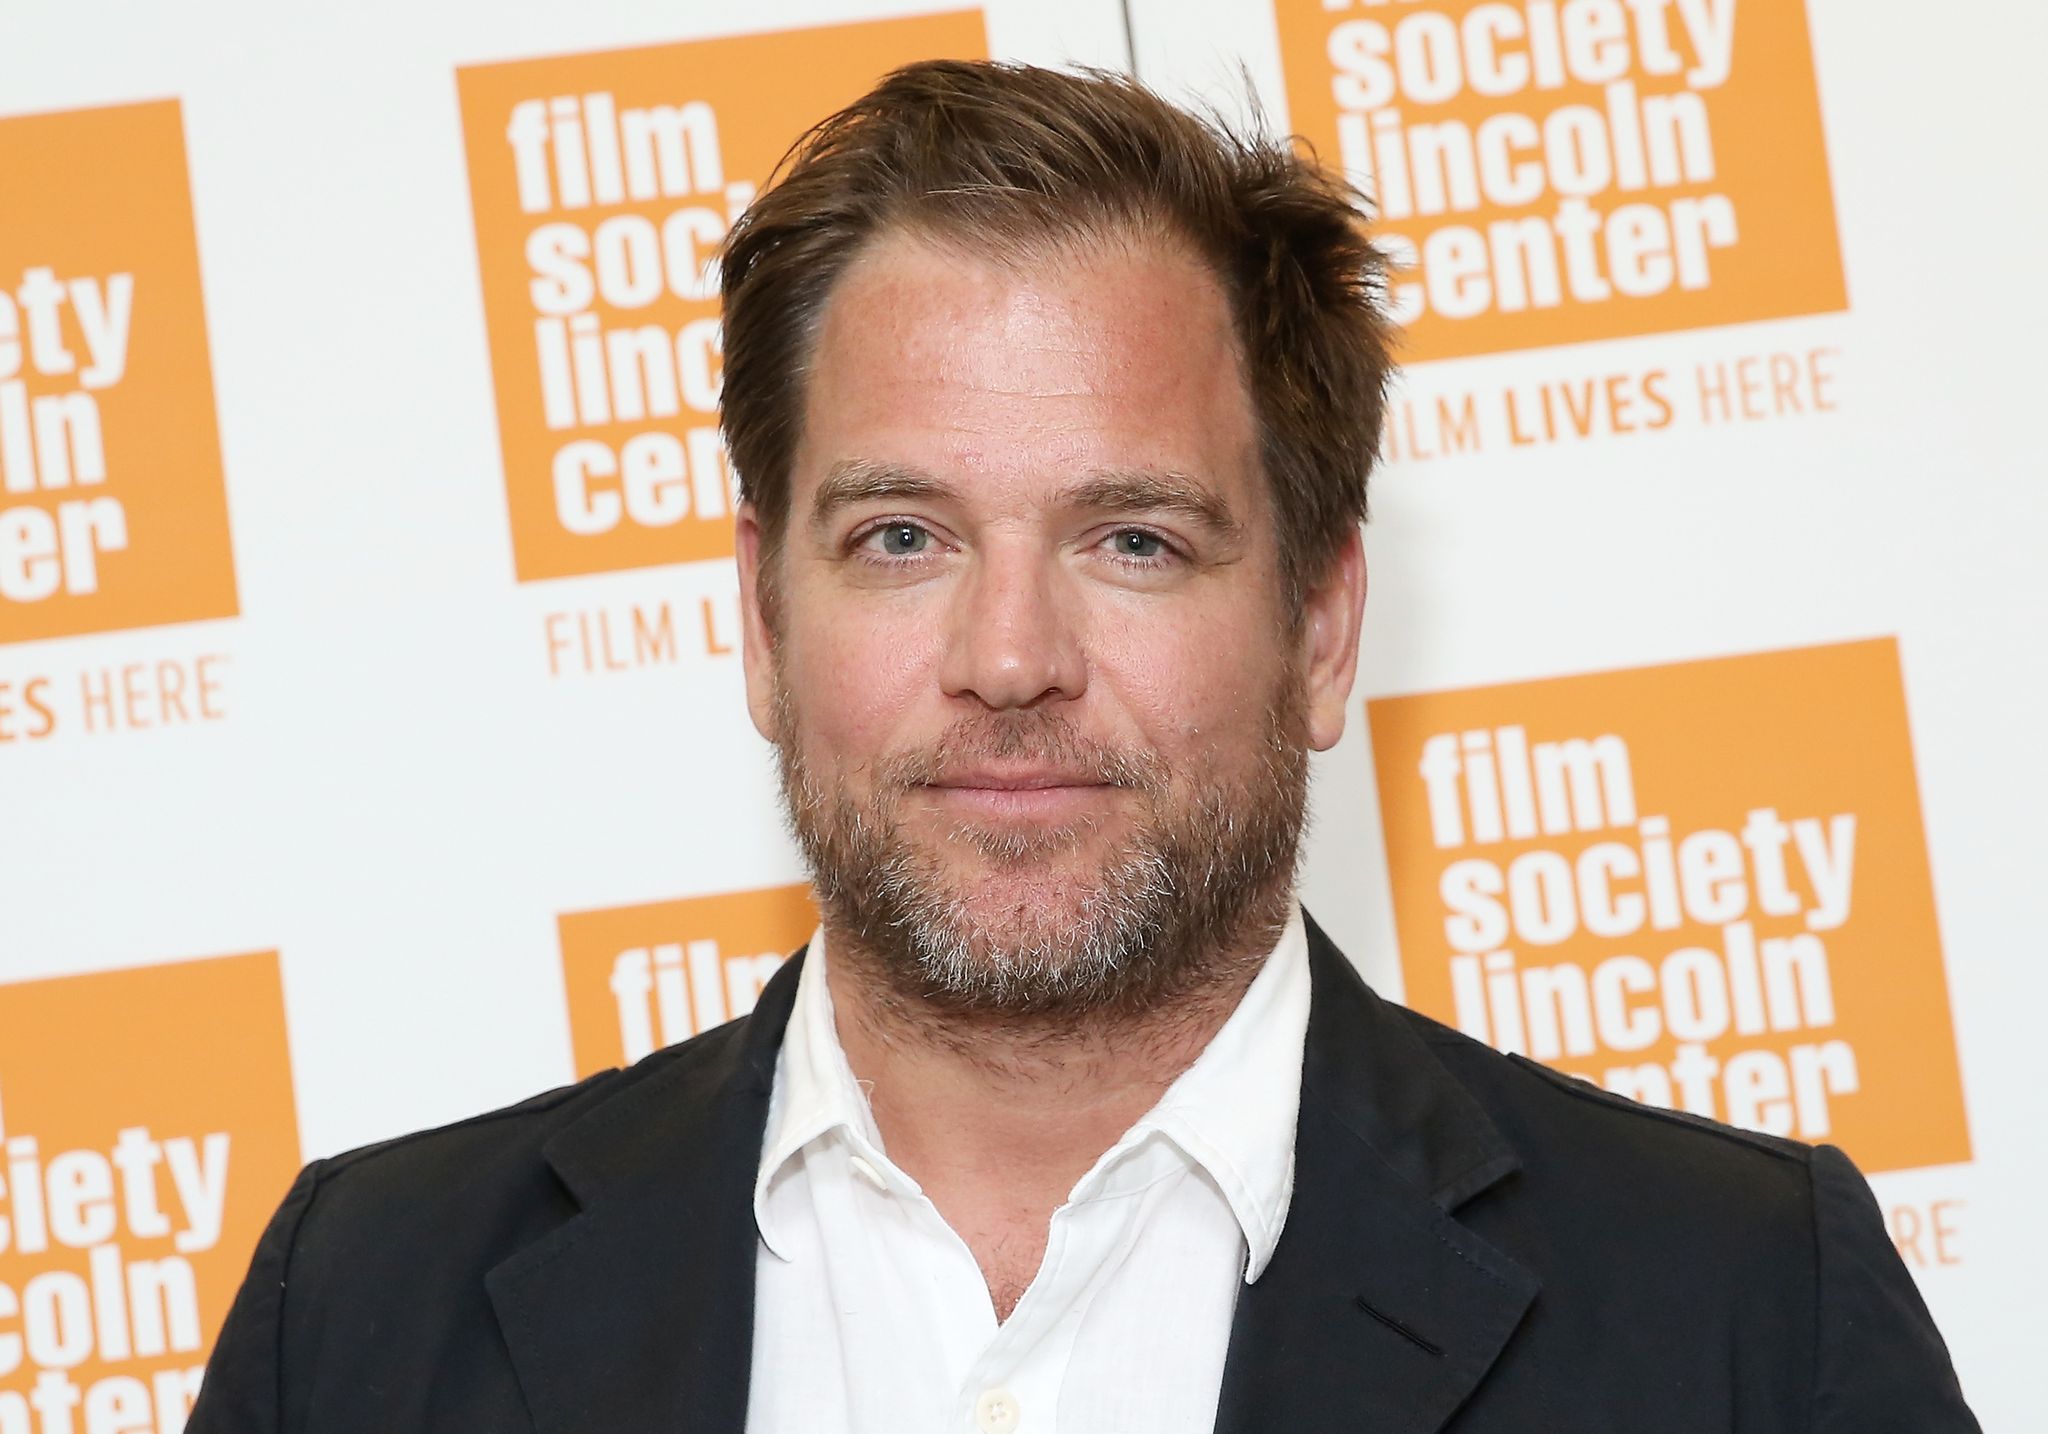 Michael Weatherly during the "Last Days Of Disco" 20th anniversary screening at Walter Reade Theater on May 24, 2018 in New York City. | Source: Getty Images